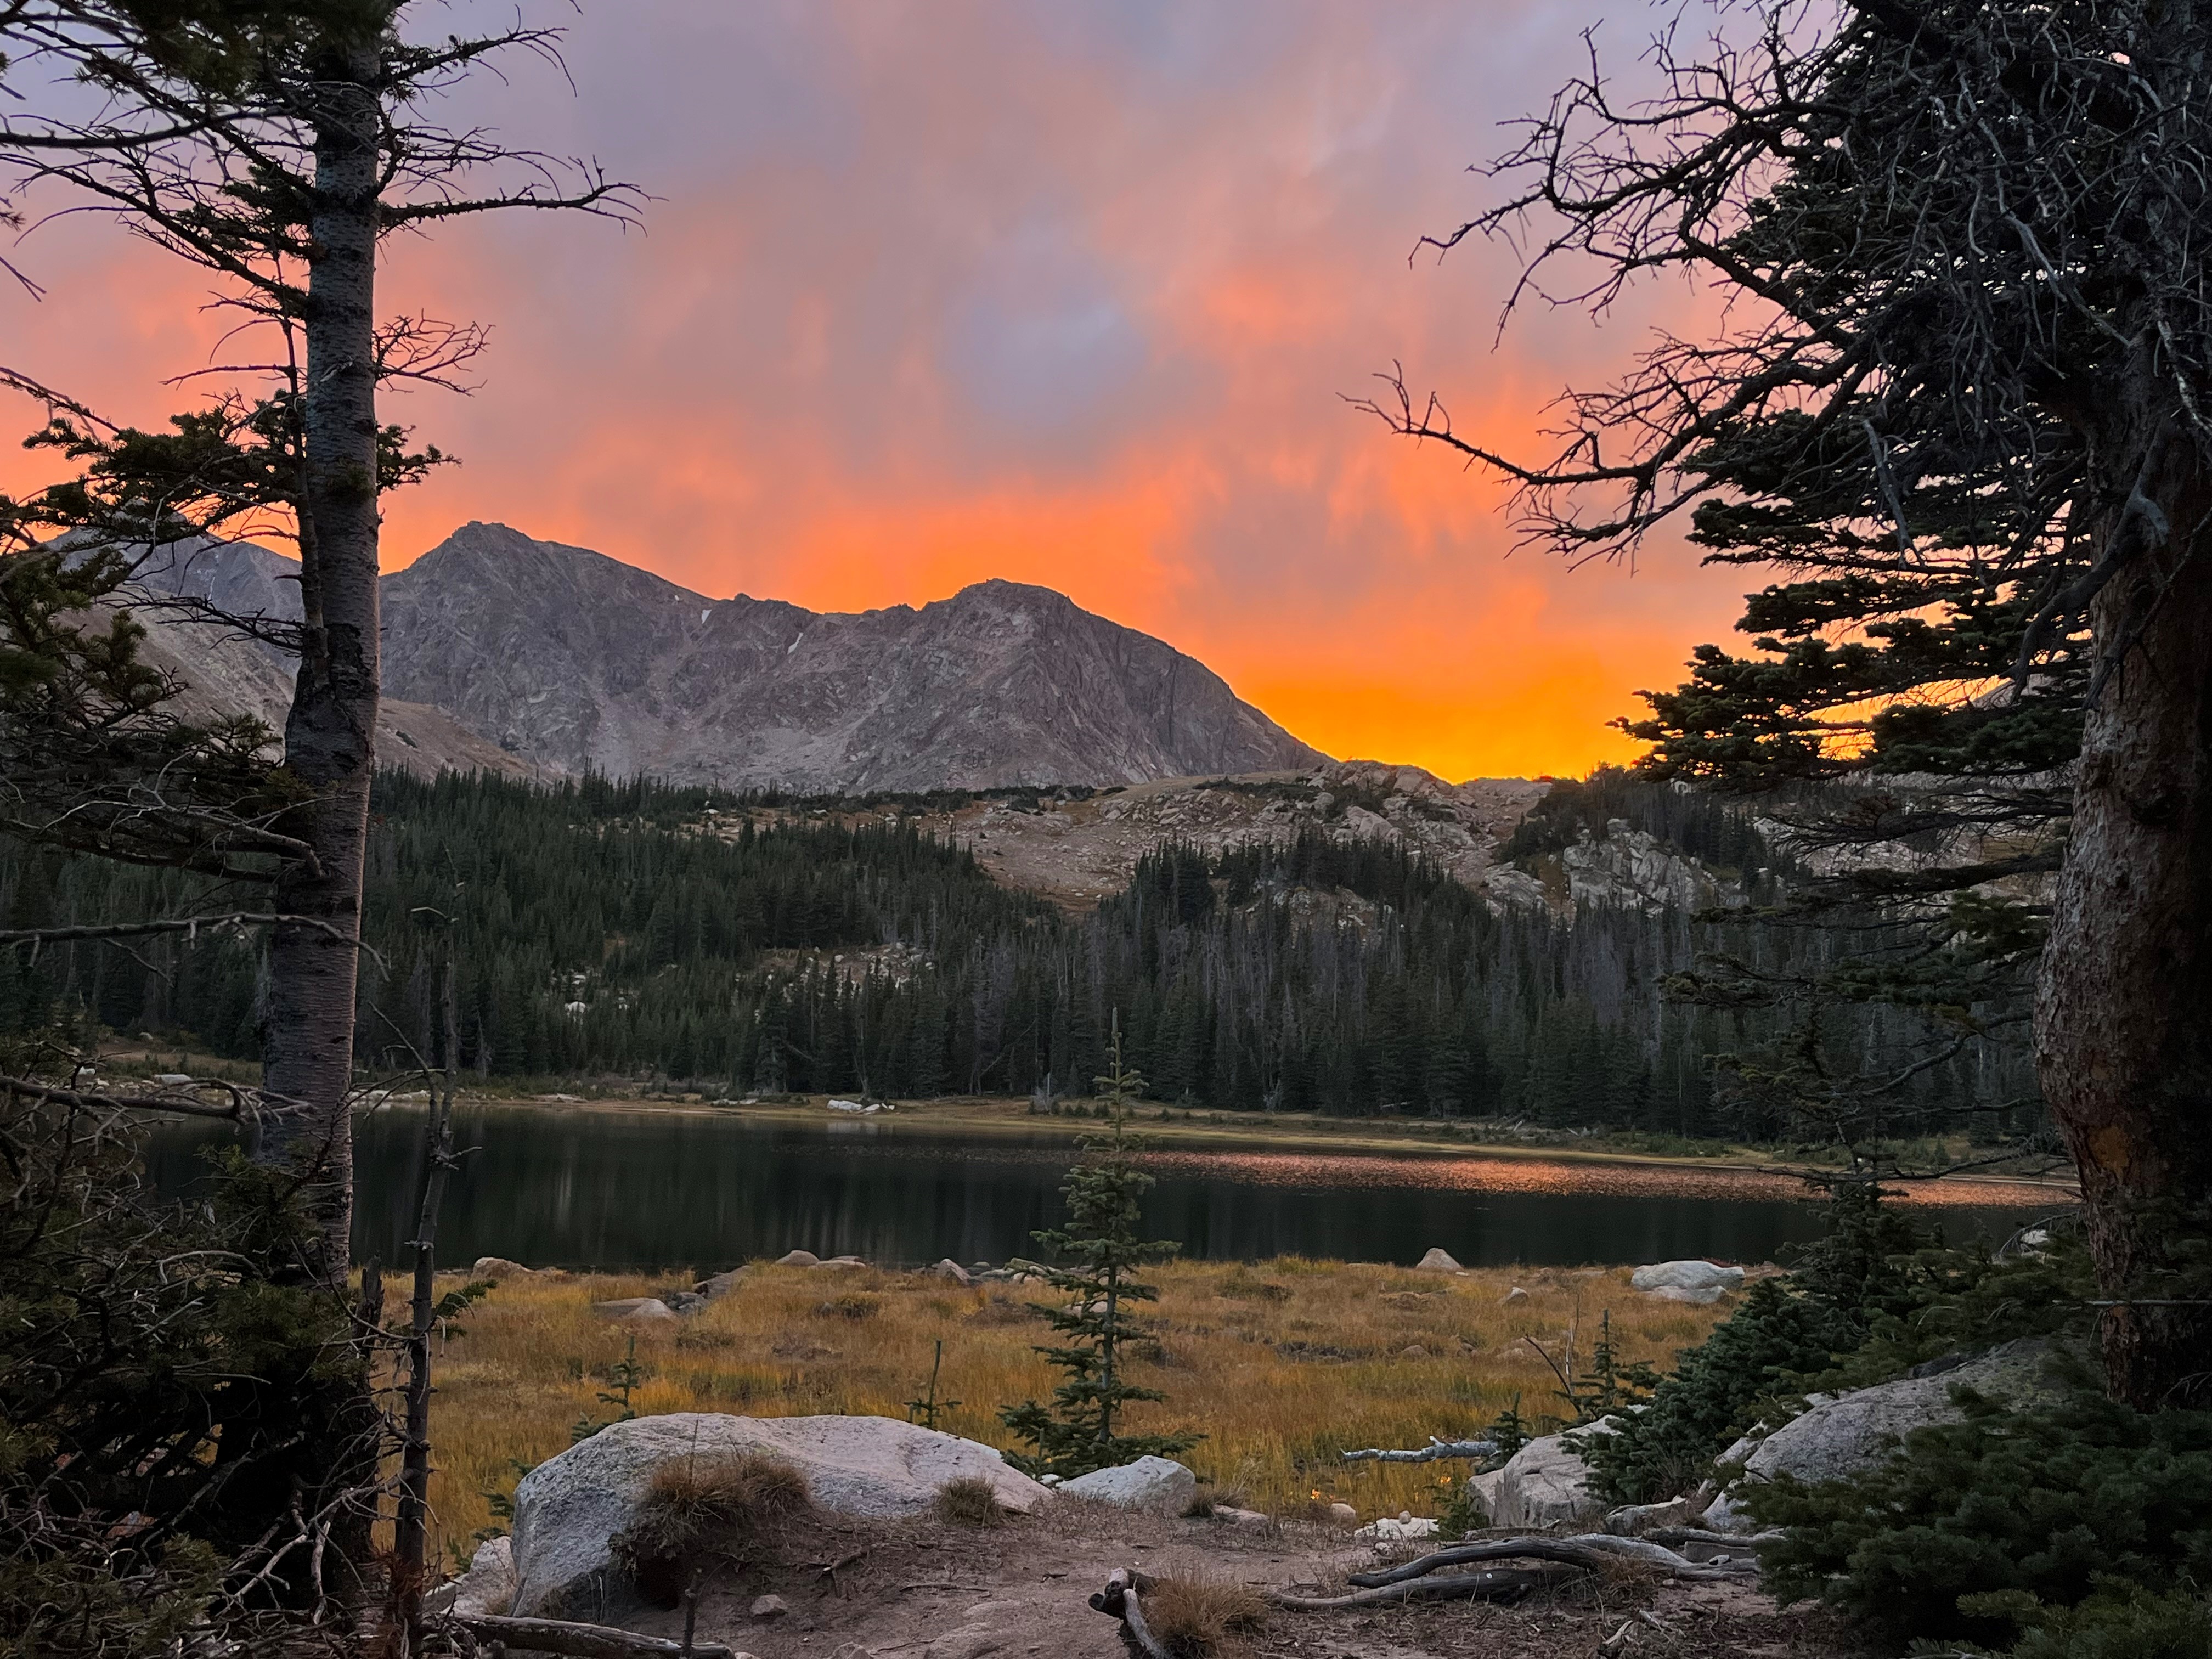 Lost Lake at sunset.<br />Photo by: Erin Muths, USGS